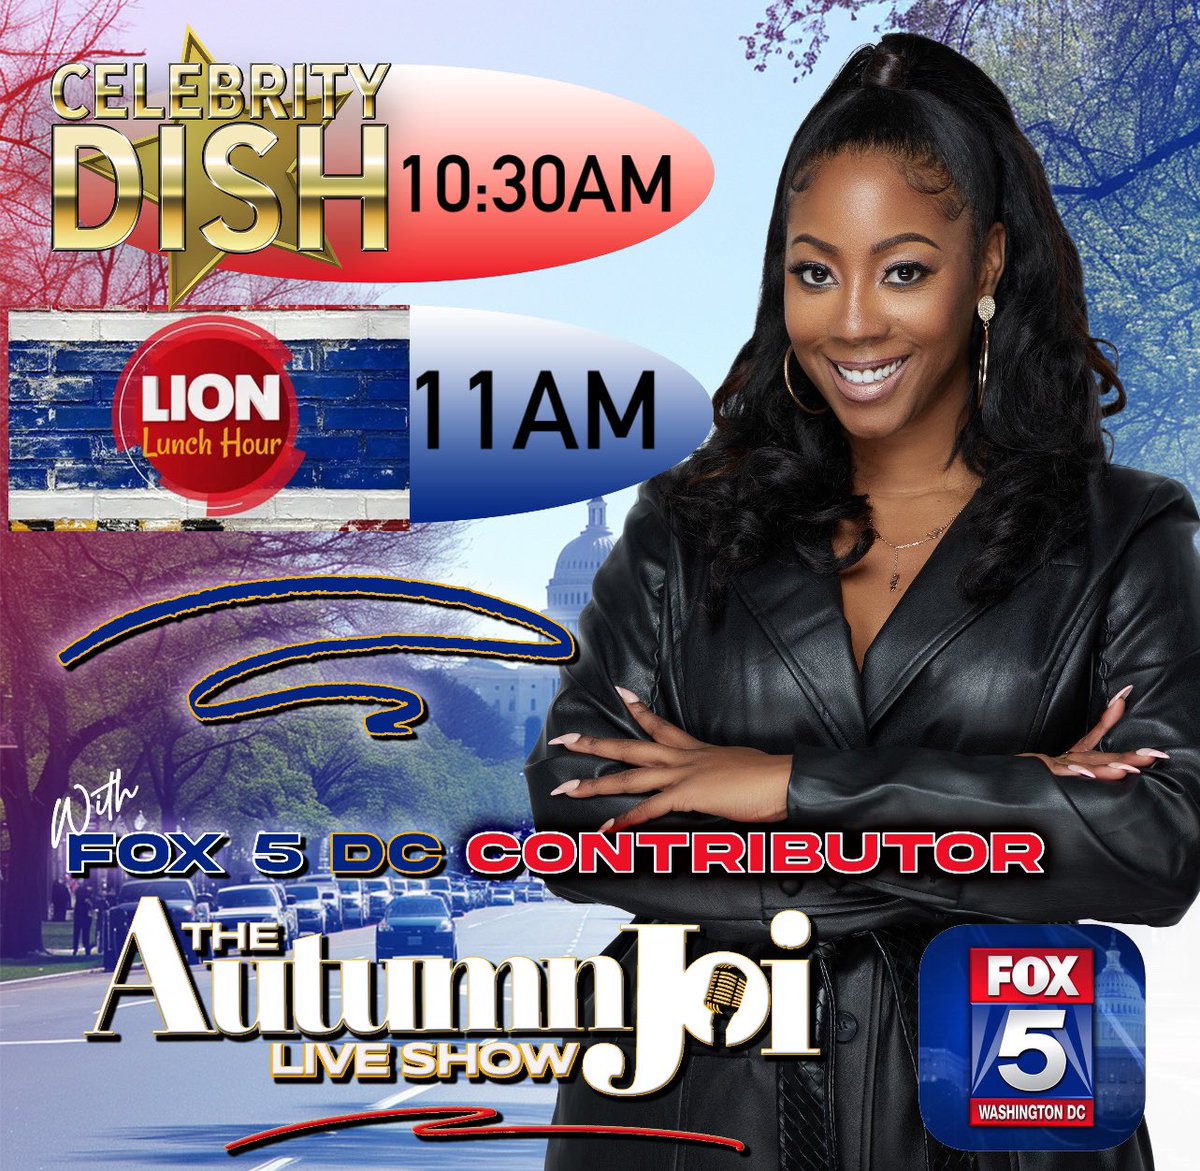 📺 So nice you can catch me TWICE on @fox5dc this morning 👏🏾 First at 10:30 am EST for #CelebrityDish and then again for an entire hour at 11am EST for #LionLunchHour 🙌🏾 Can’t wait to see what we’re cooking up on today’s show 🍱 See you soon Live Squad!! #tv #fox5dc…